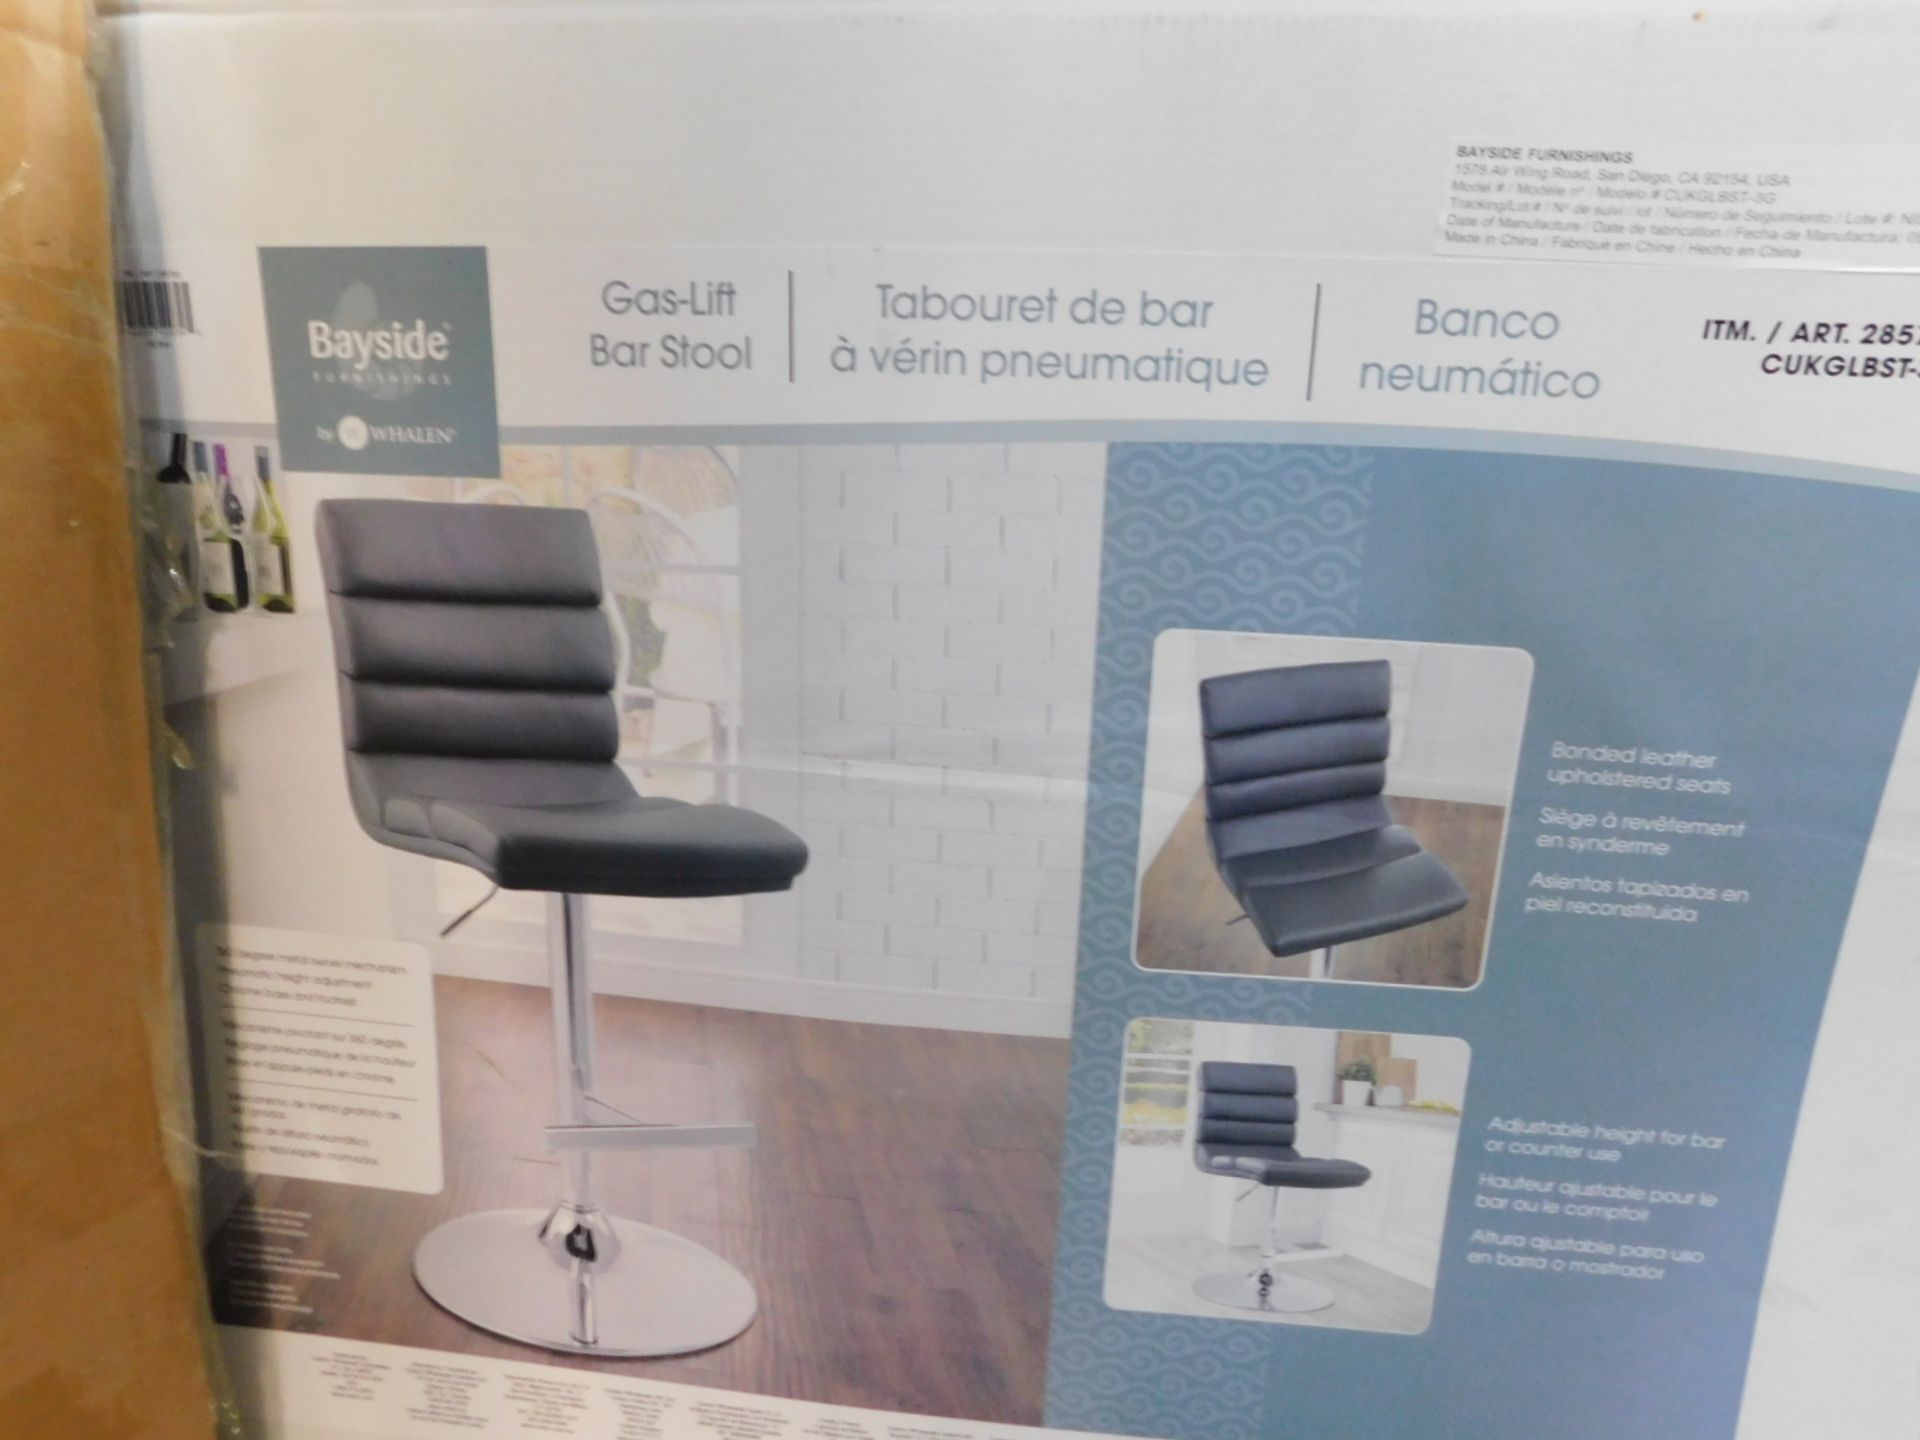 1 BOXED BAYSIDE FURNISHINGS GREY FAUX LEATHER GAS LIFT BAR STOOL RRP Â£119